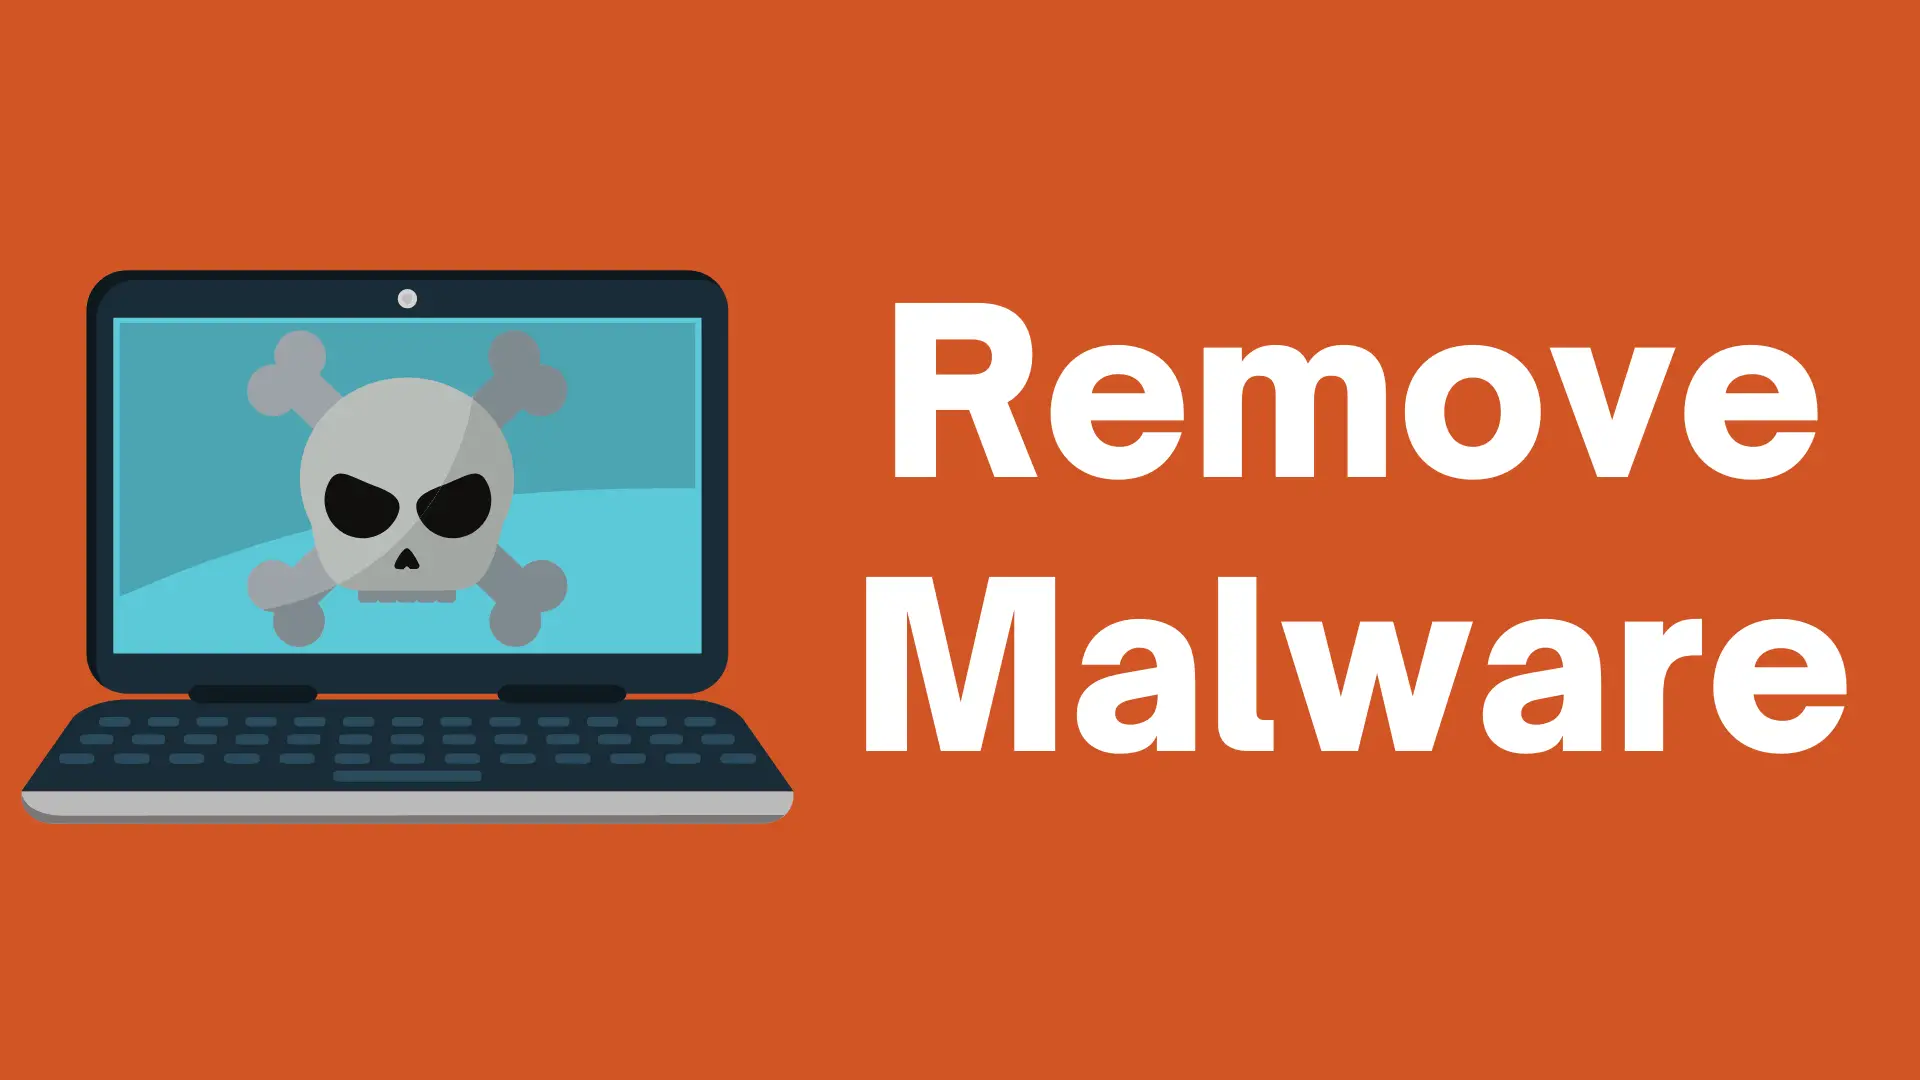 How to Remove Malware from Windows Computer